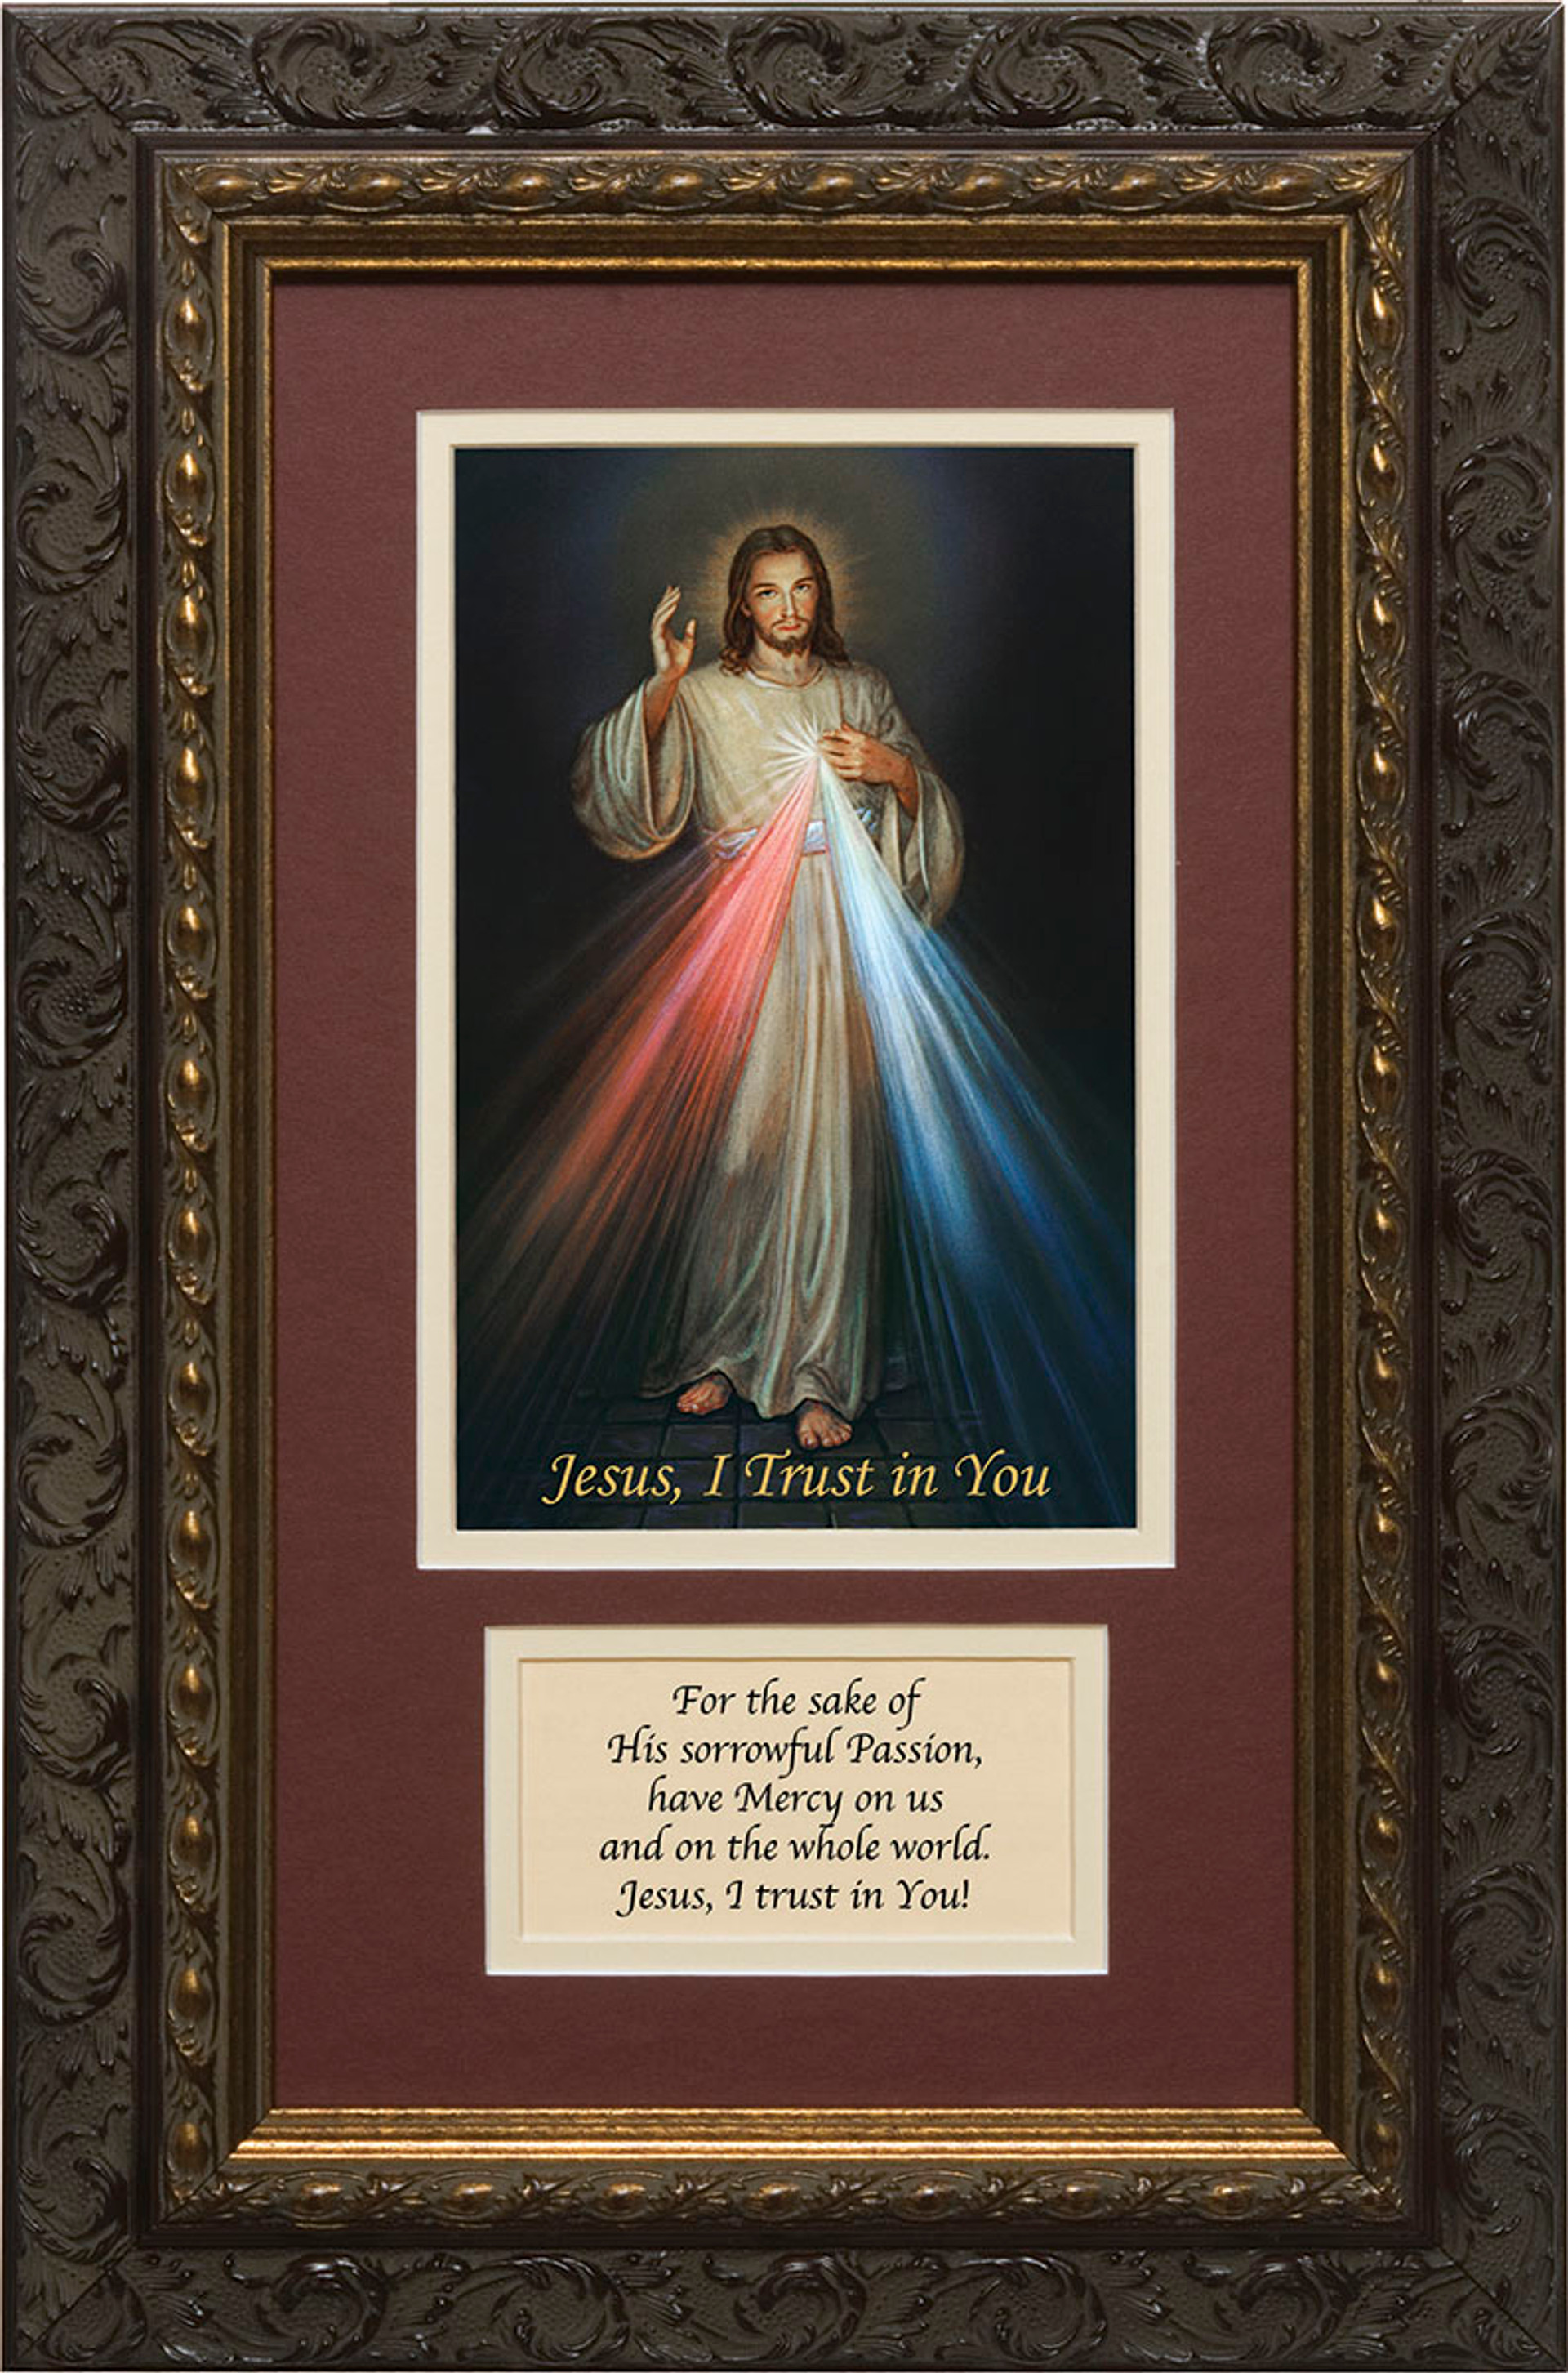 Divine Mercy Matted with Prayer